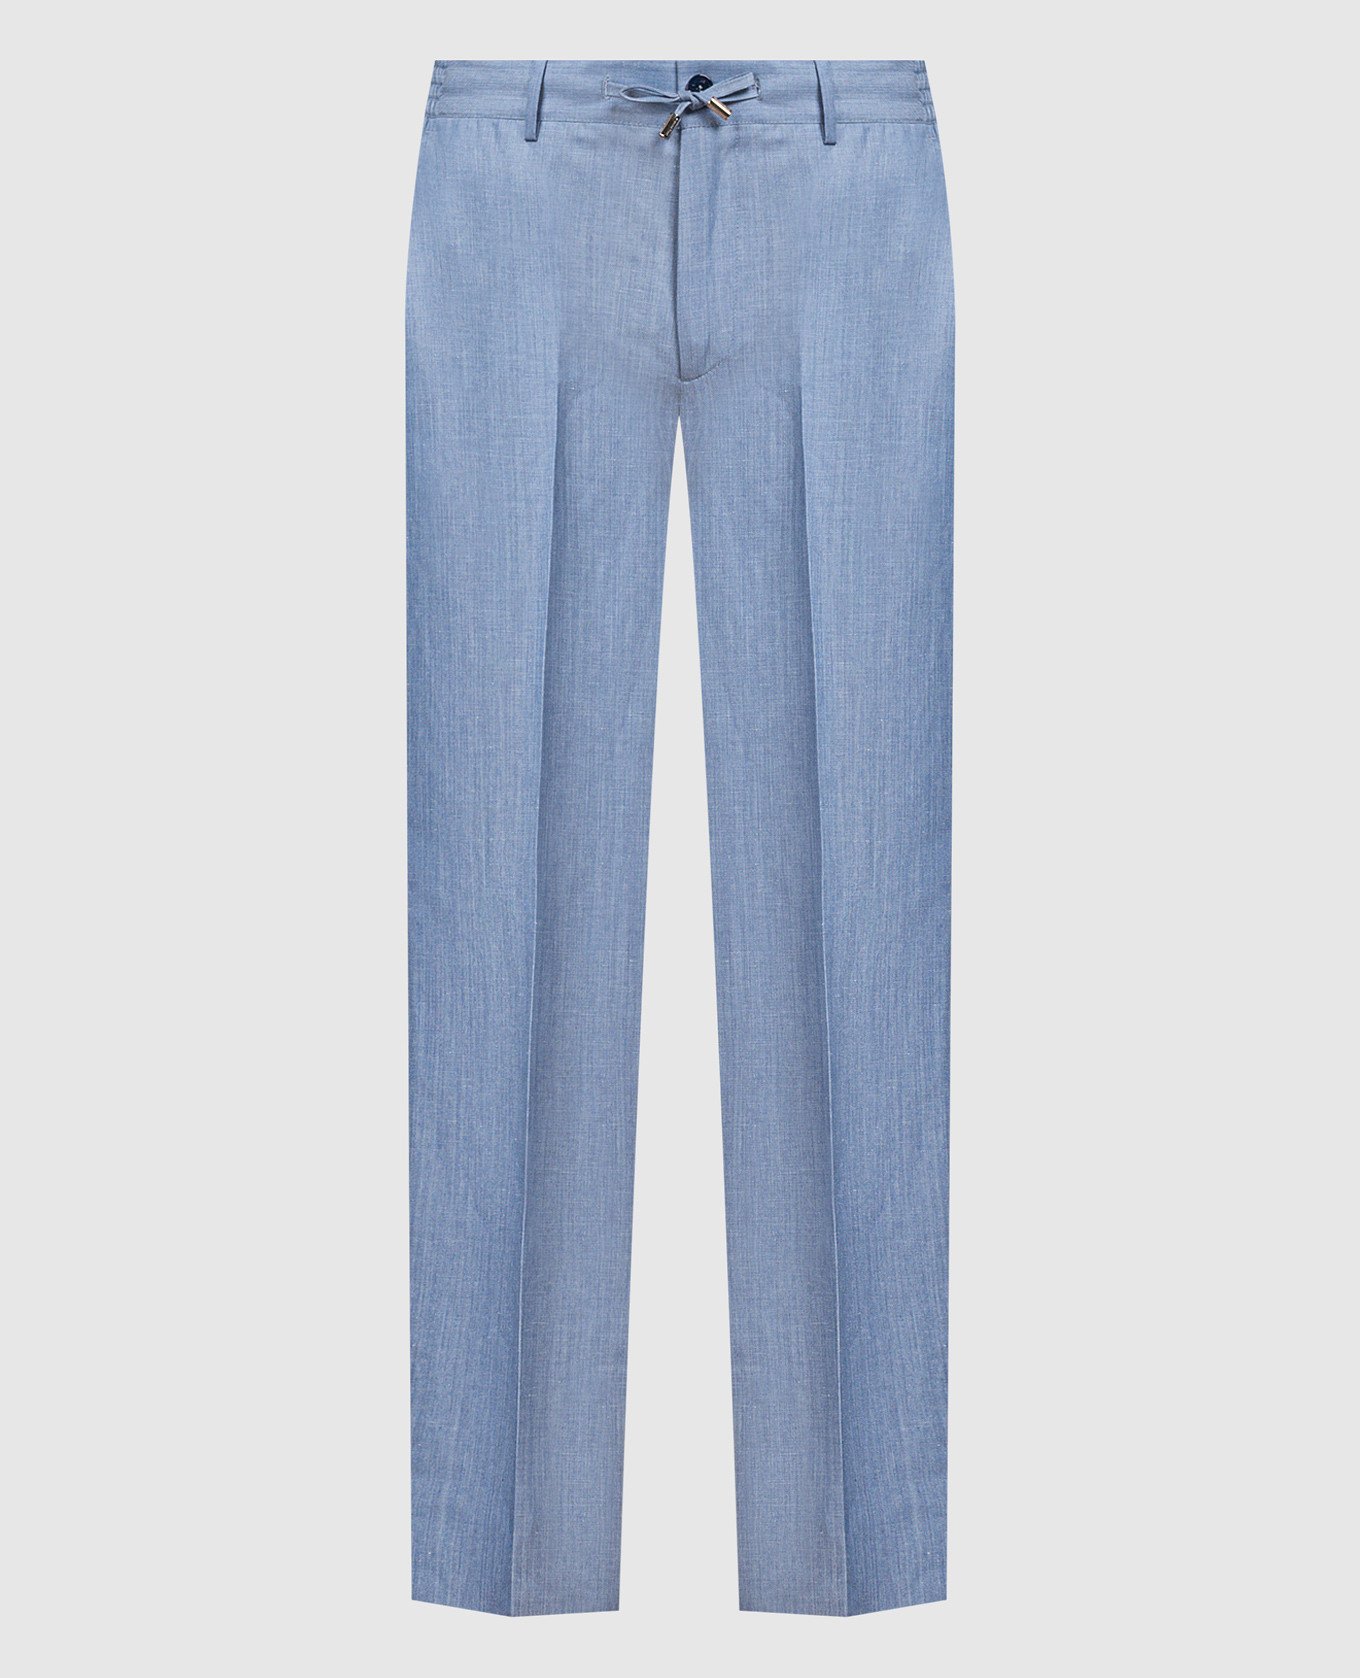 Blue wool and linen trousers with metallic logo